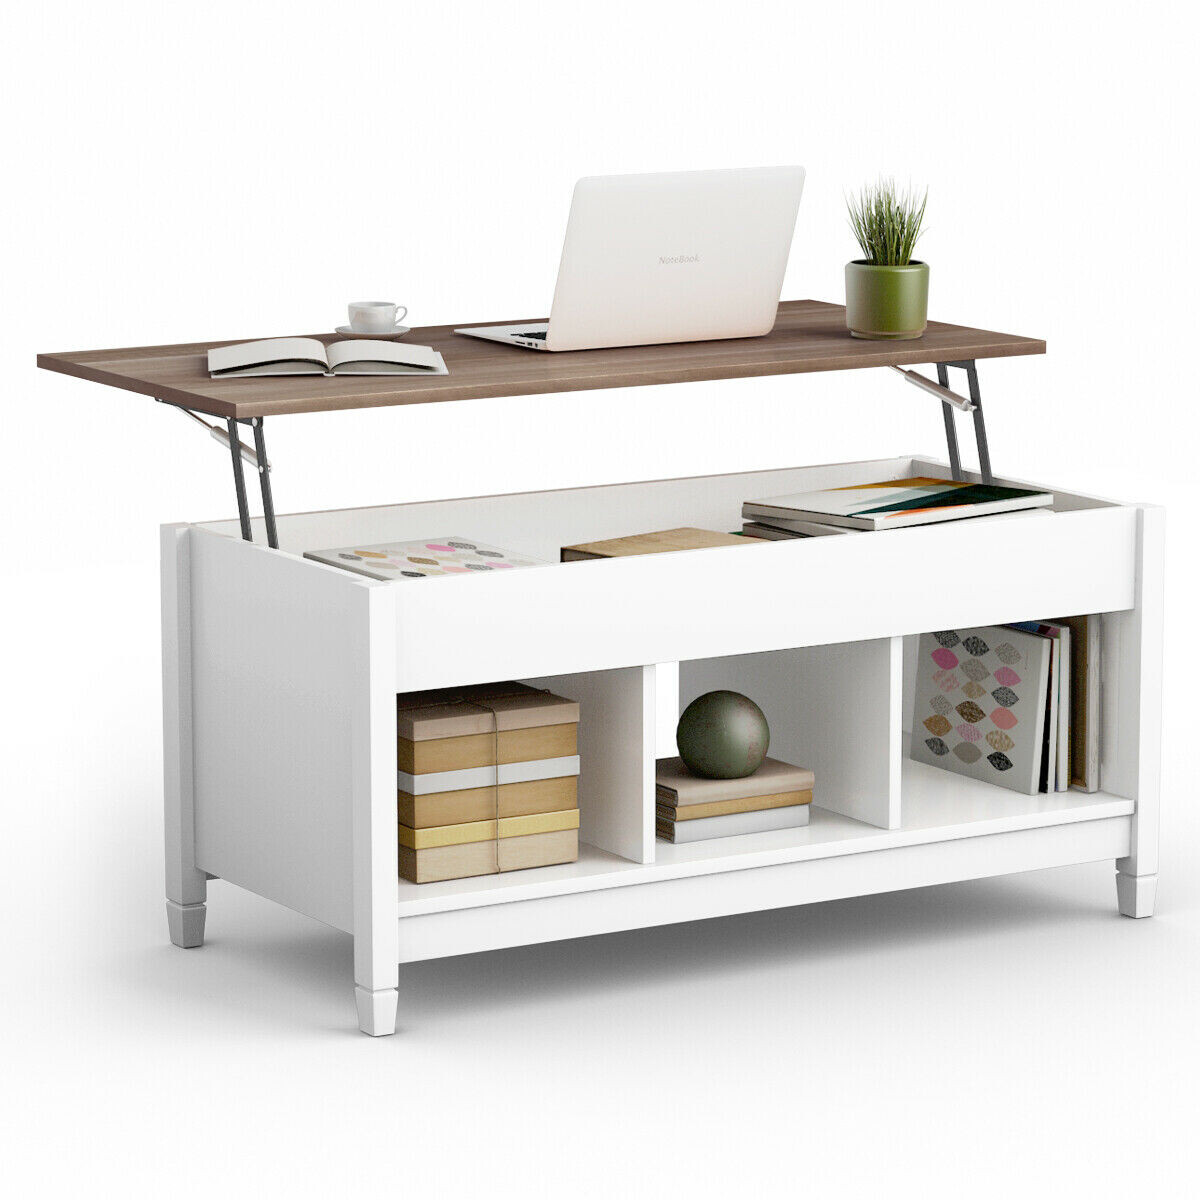 Lift Top Coffee Table with Hidden Storage Compartment-White - Color: White